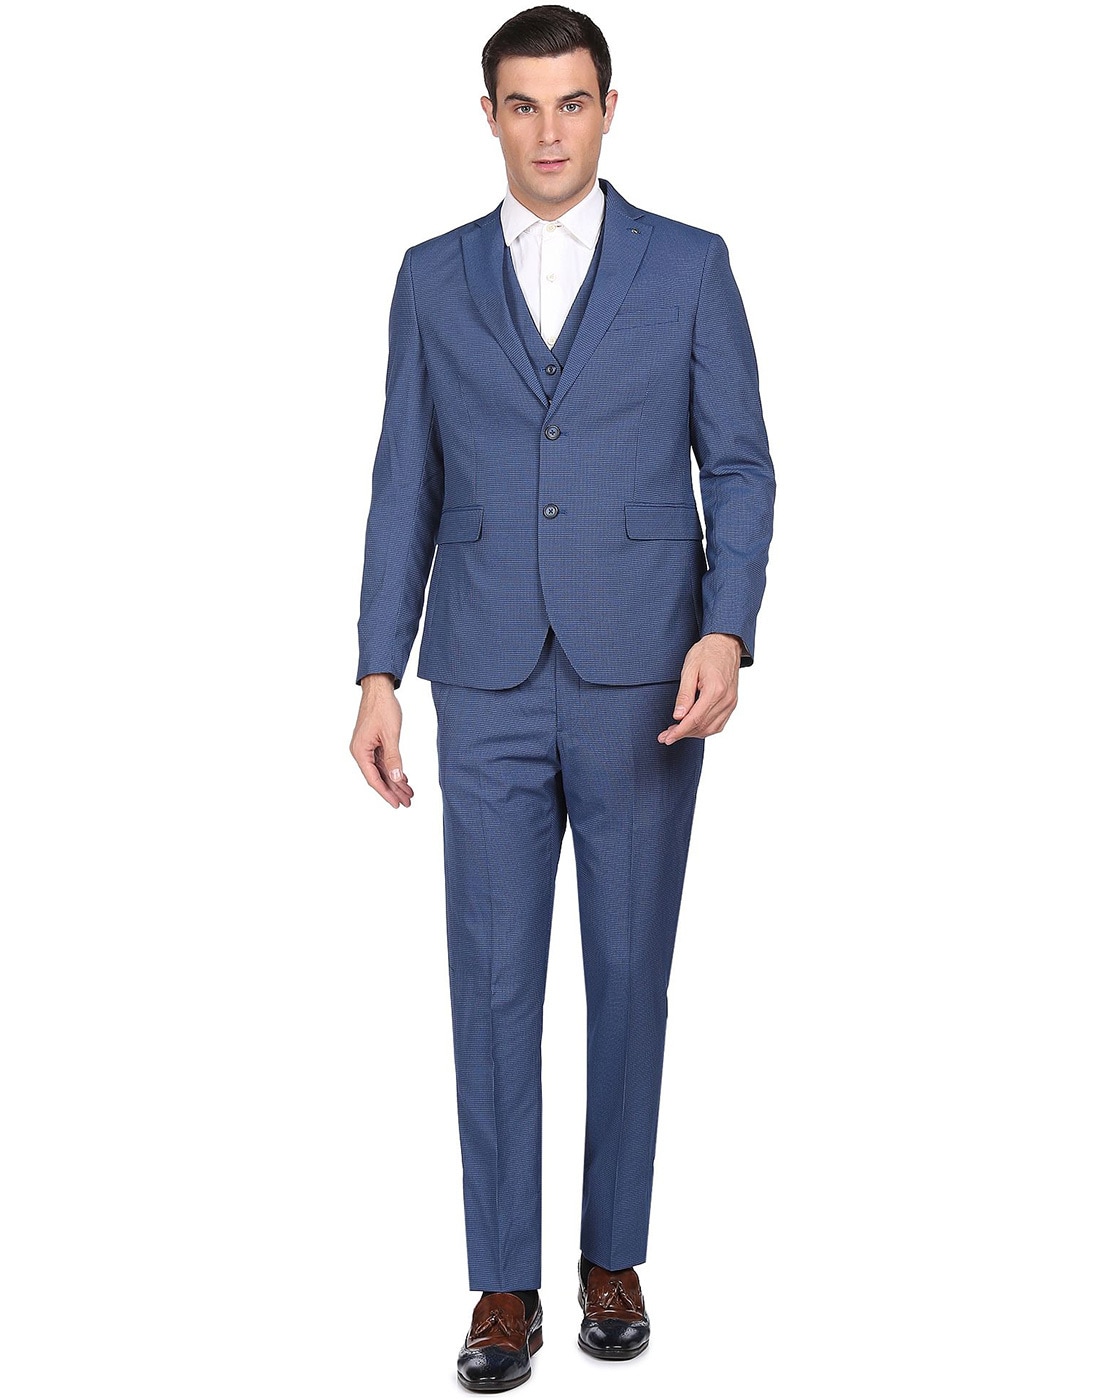 Where to Buy Ready-to-Wear Suits in Metro Manila